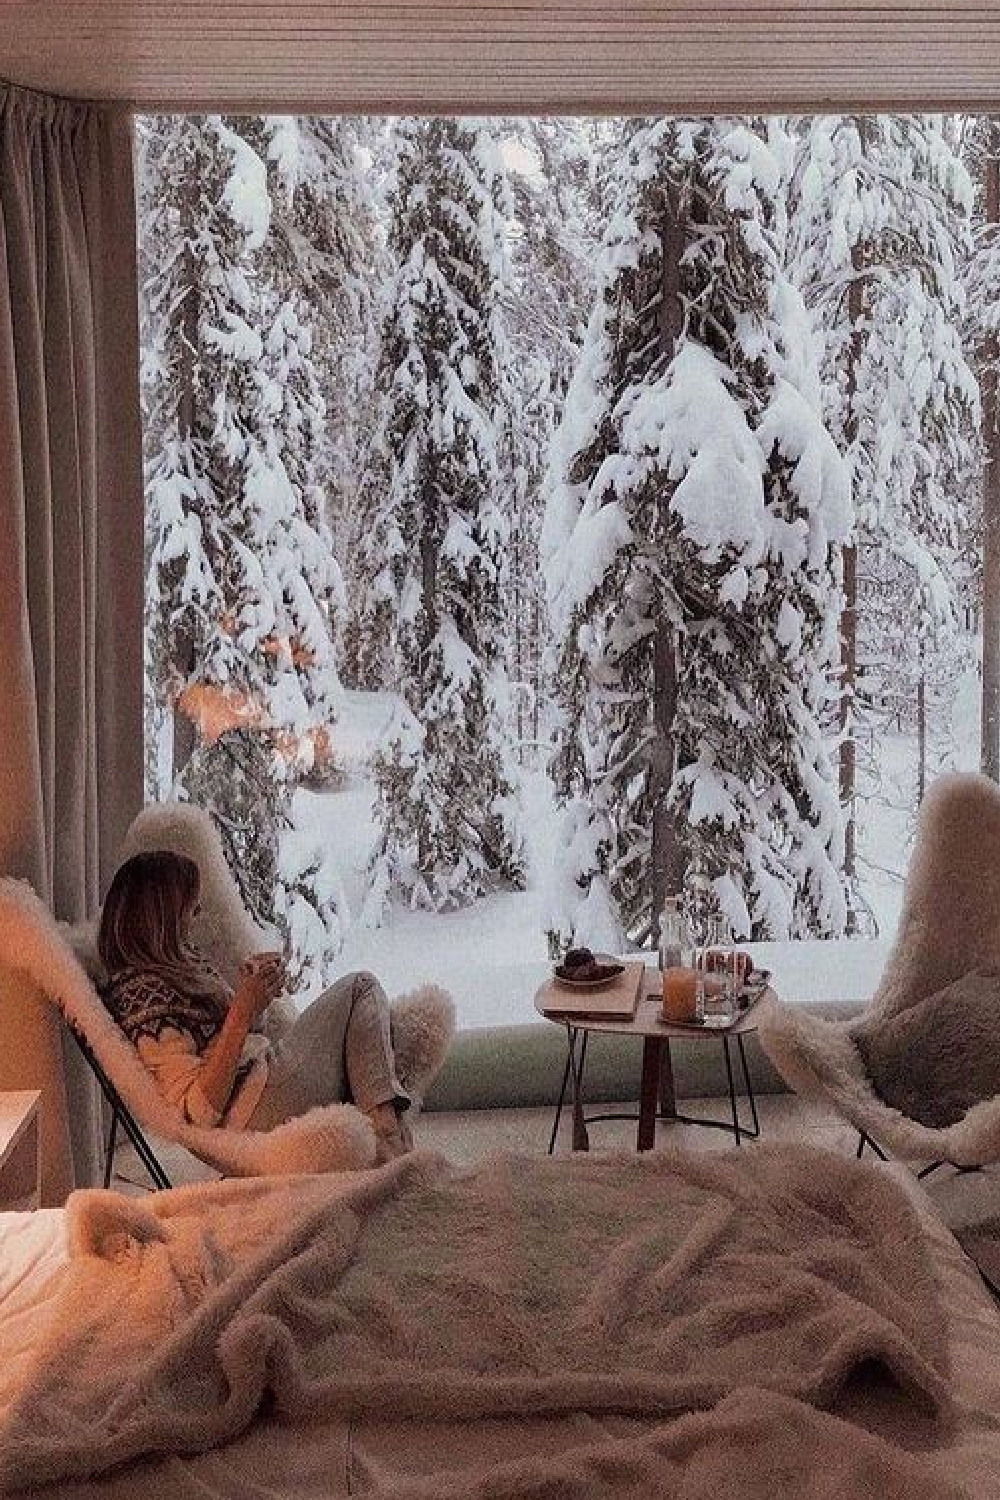 Winter wonderland woods in snow and cozy room with sherpa chairs - @theglampingland. #cozychristmas #snowywoods